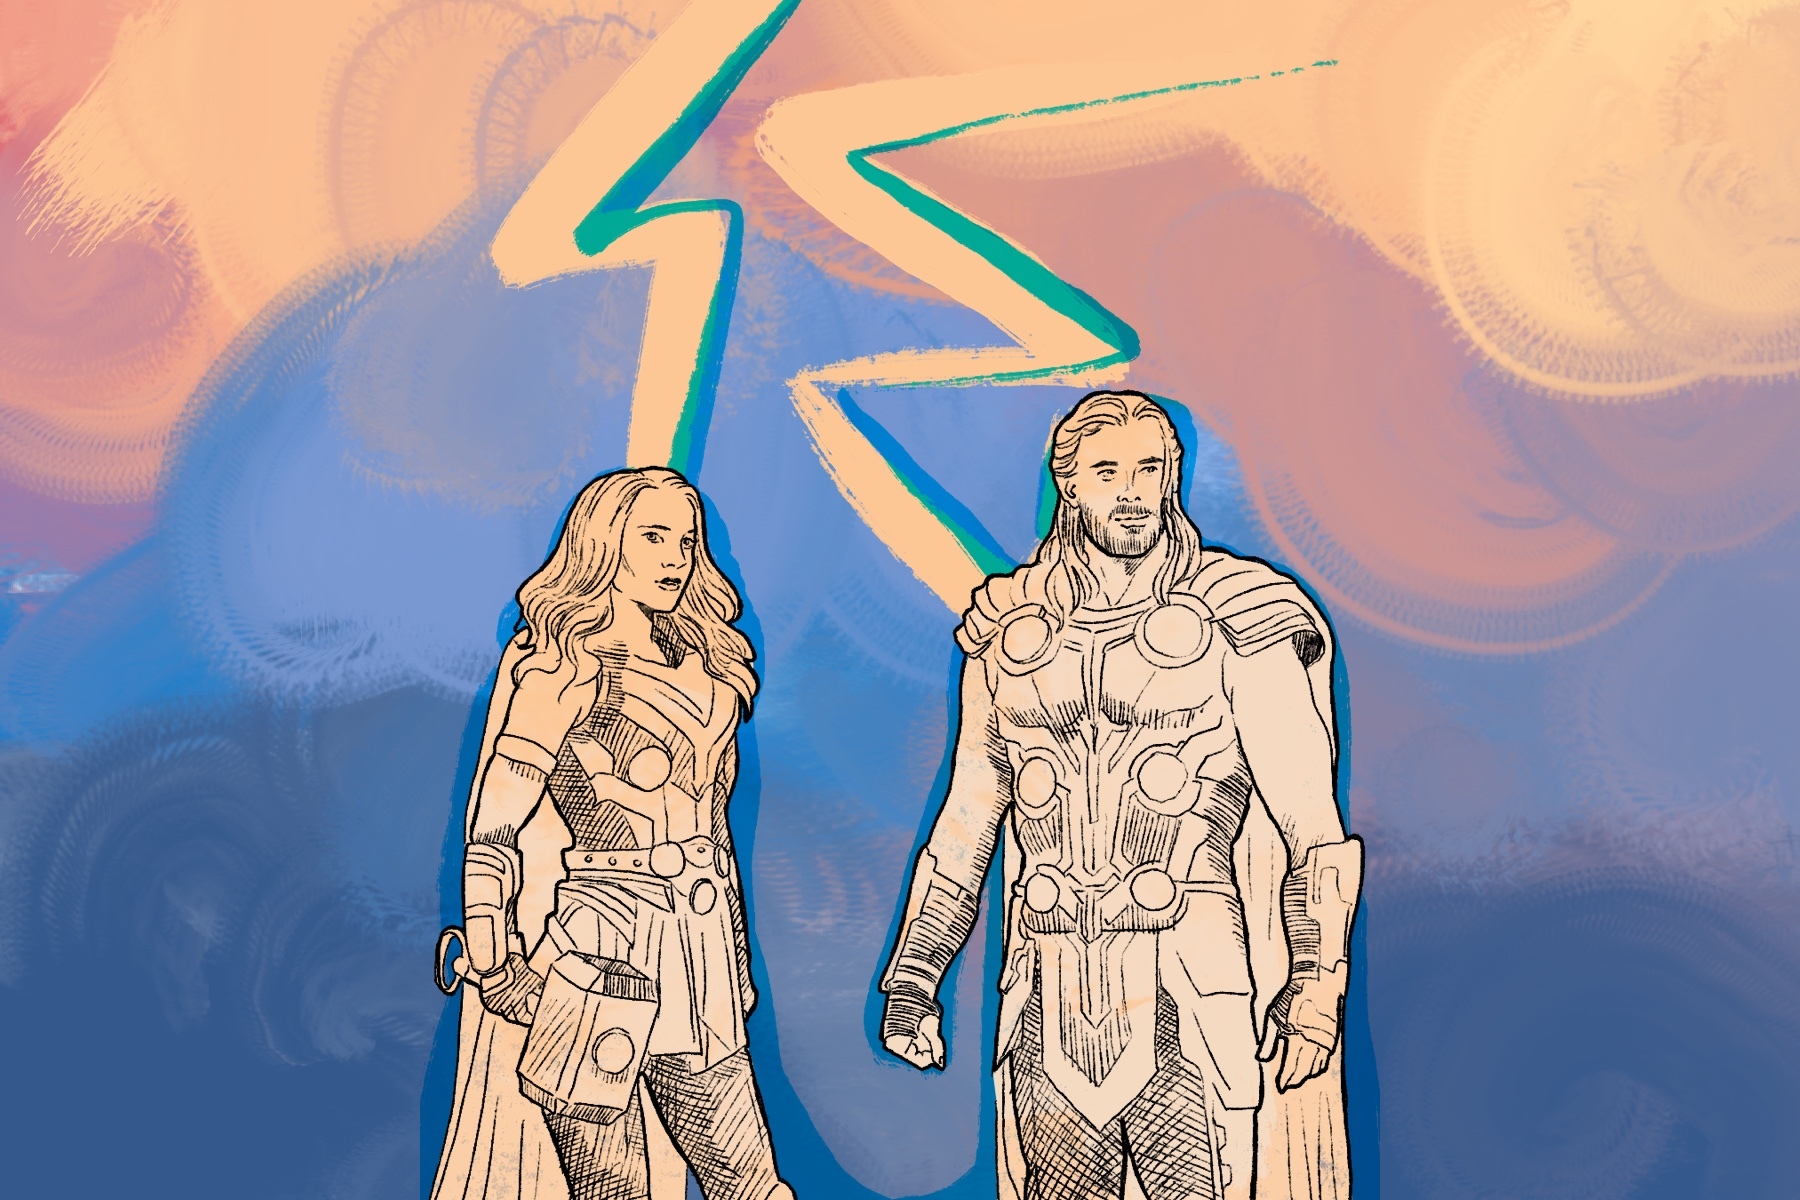 A drawing of Thor: Love and Thunder shows two characters against a colorful background.